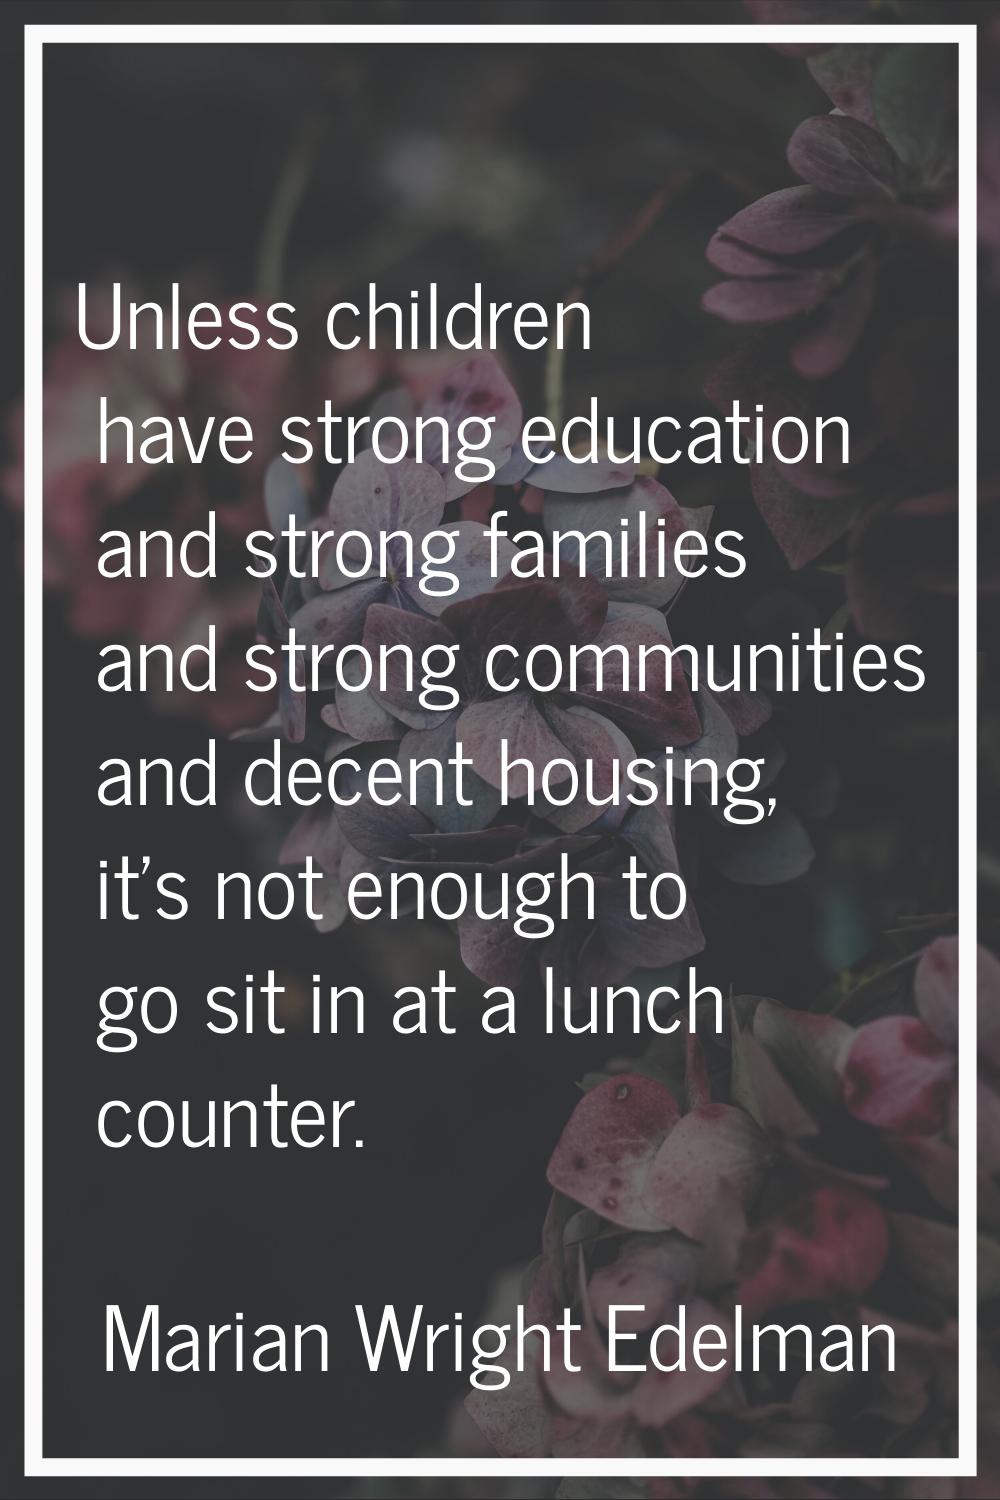 Unless children have strong education and strong families and strong communities and decent housing